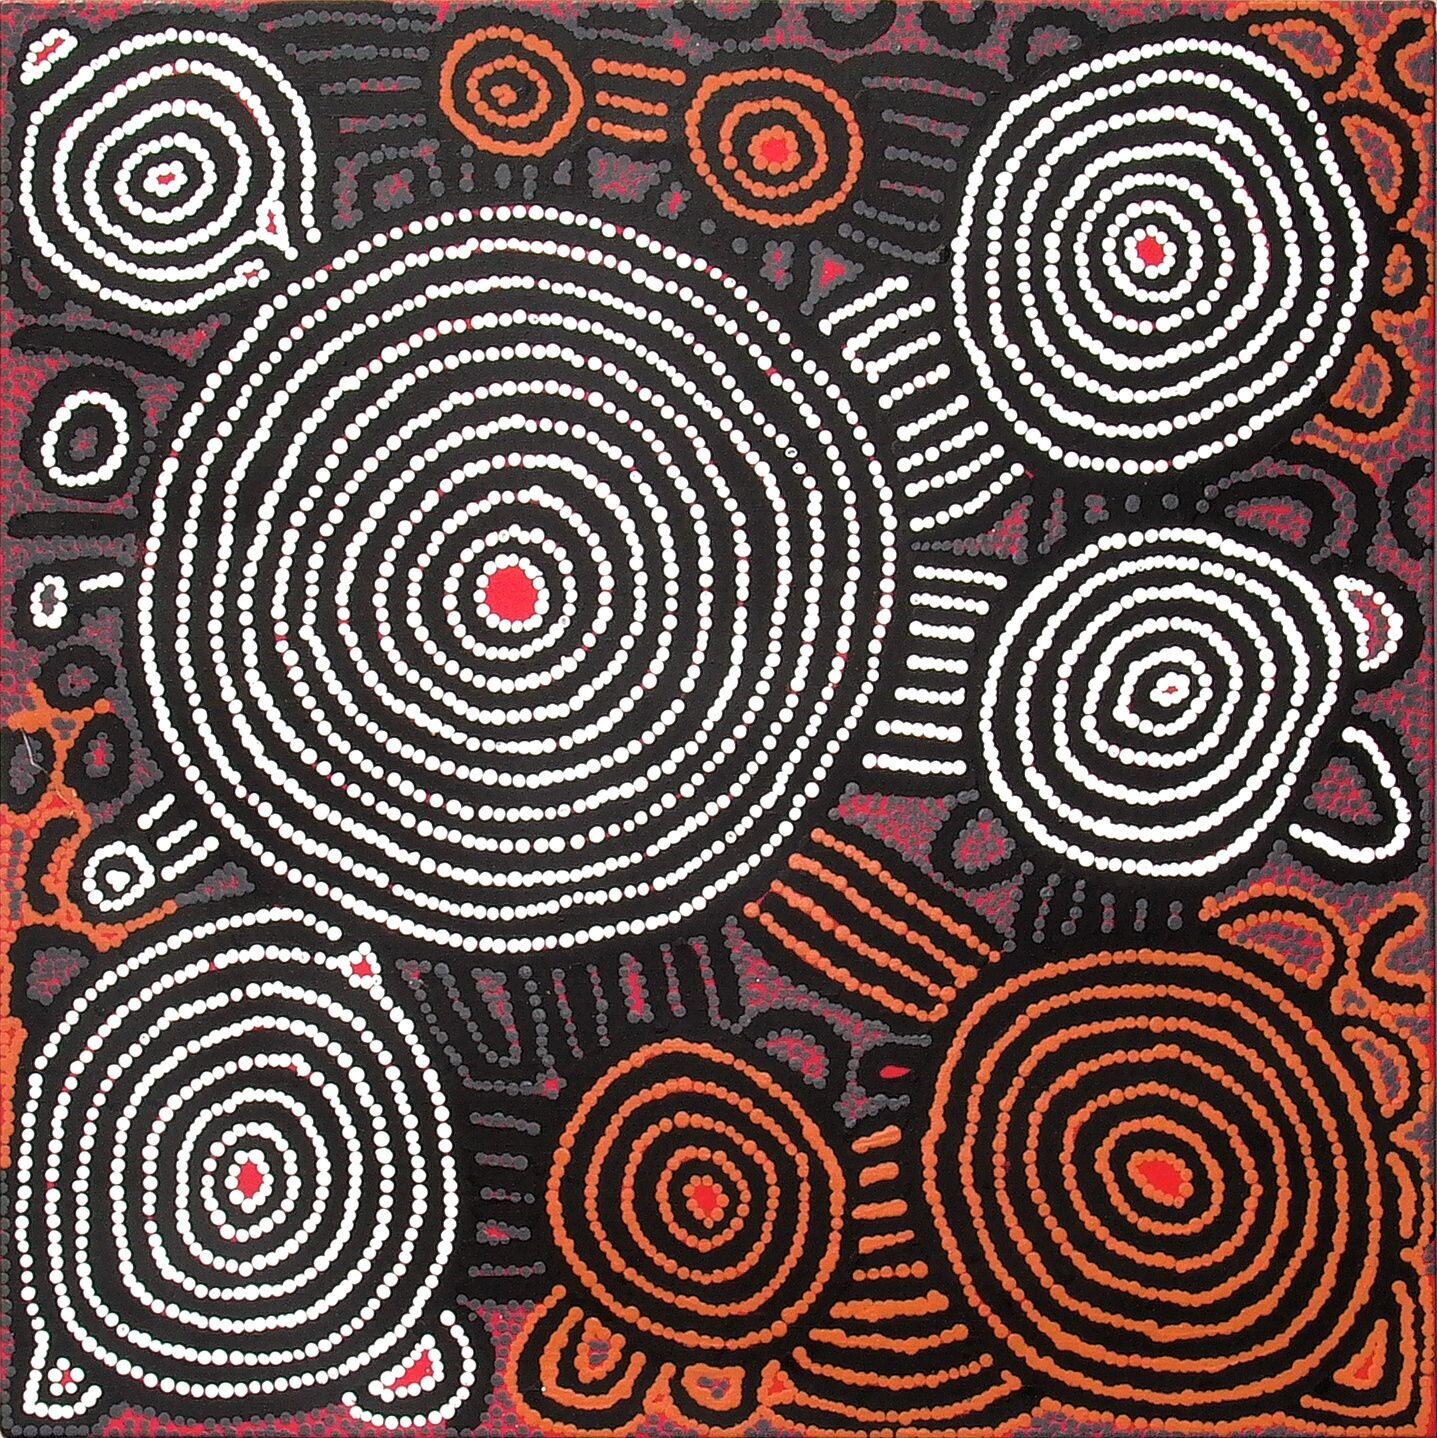 Tingari Cycle 2005, by Barney Campbell Tjakamarra
91x91cm